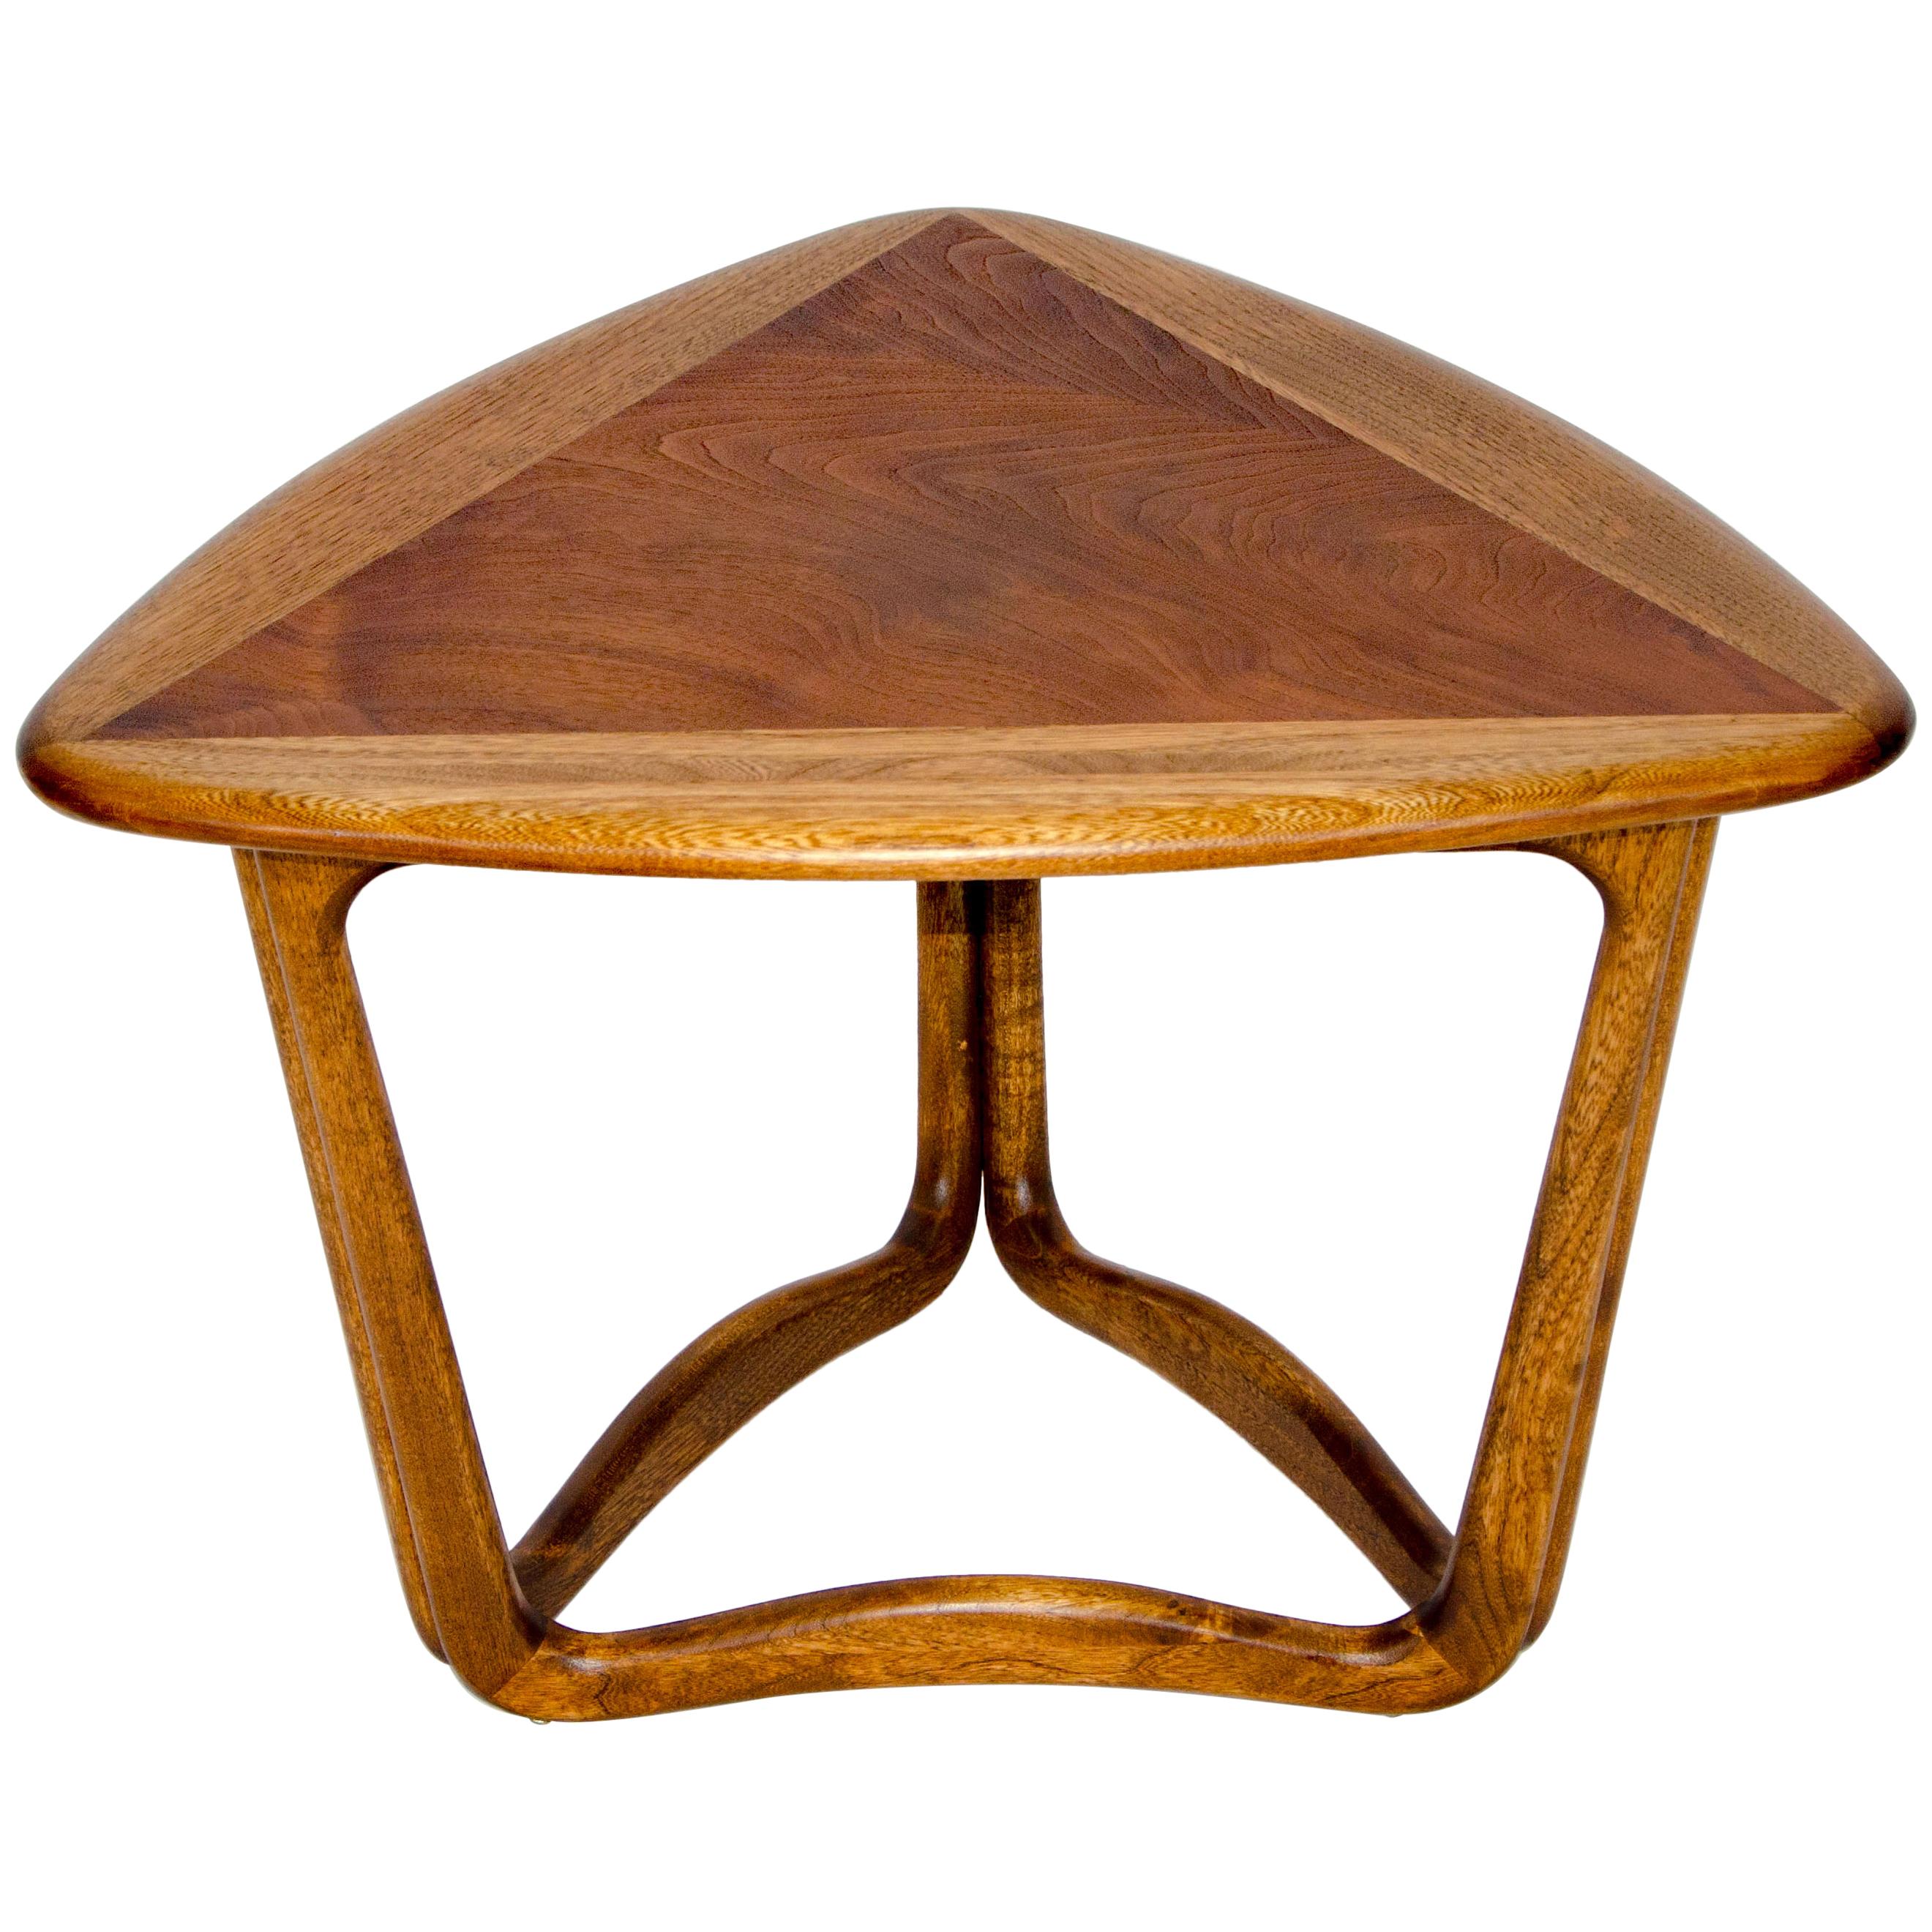 Small Triangular Occasional or End Table by Lane Furniture